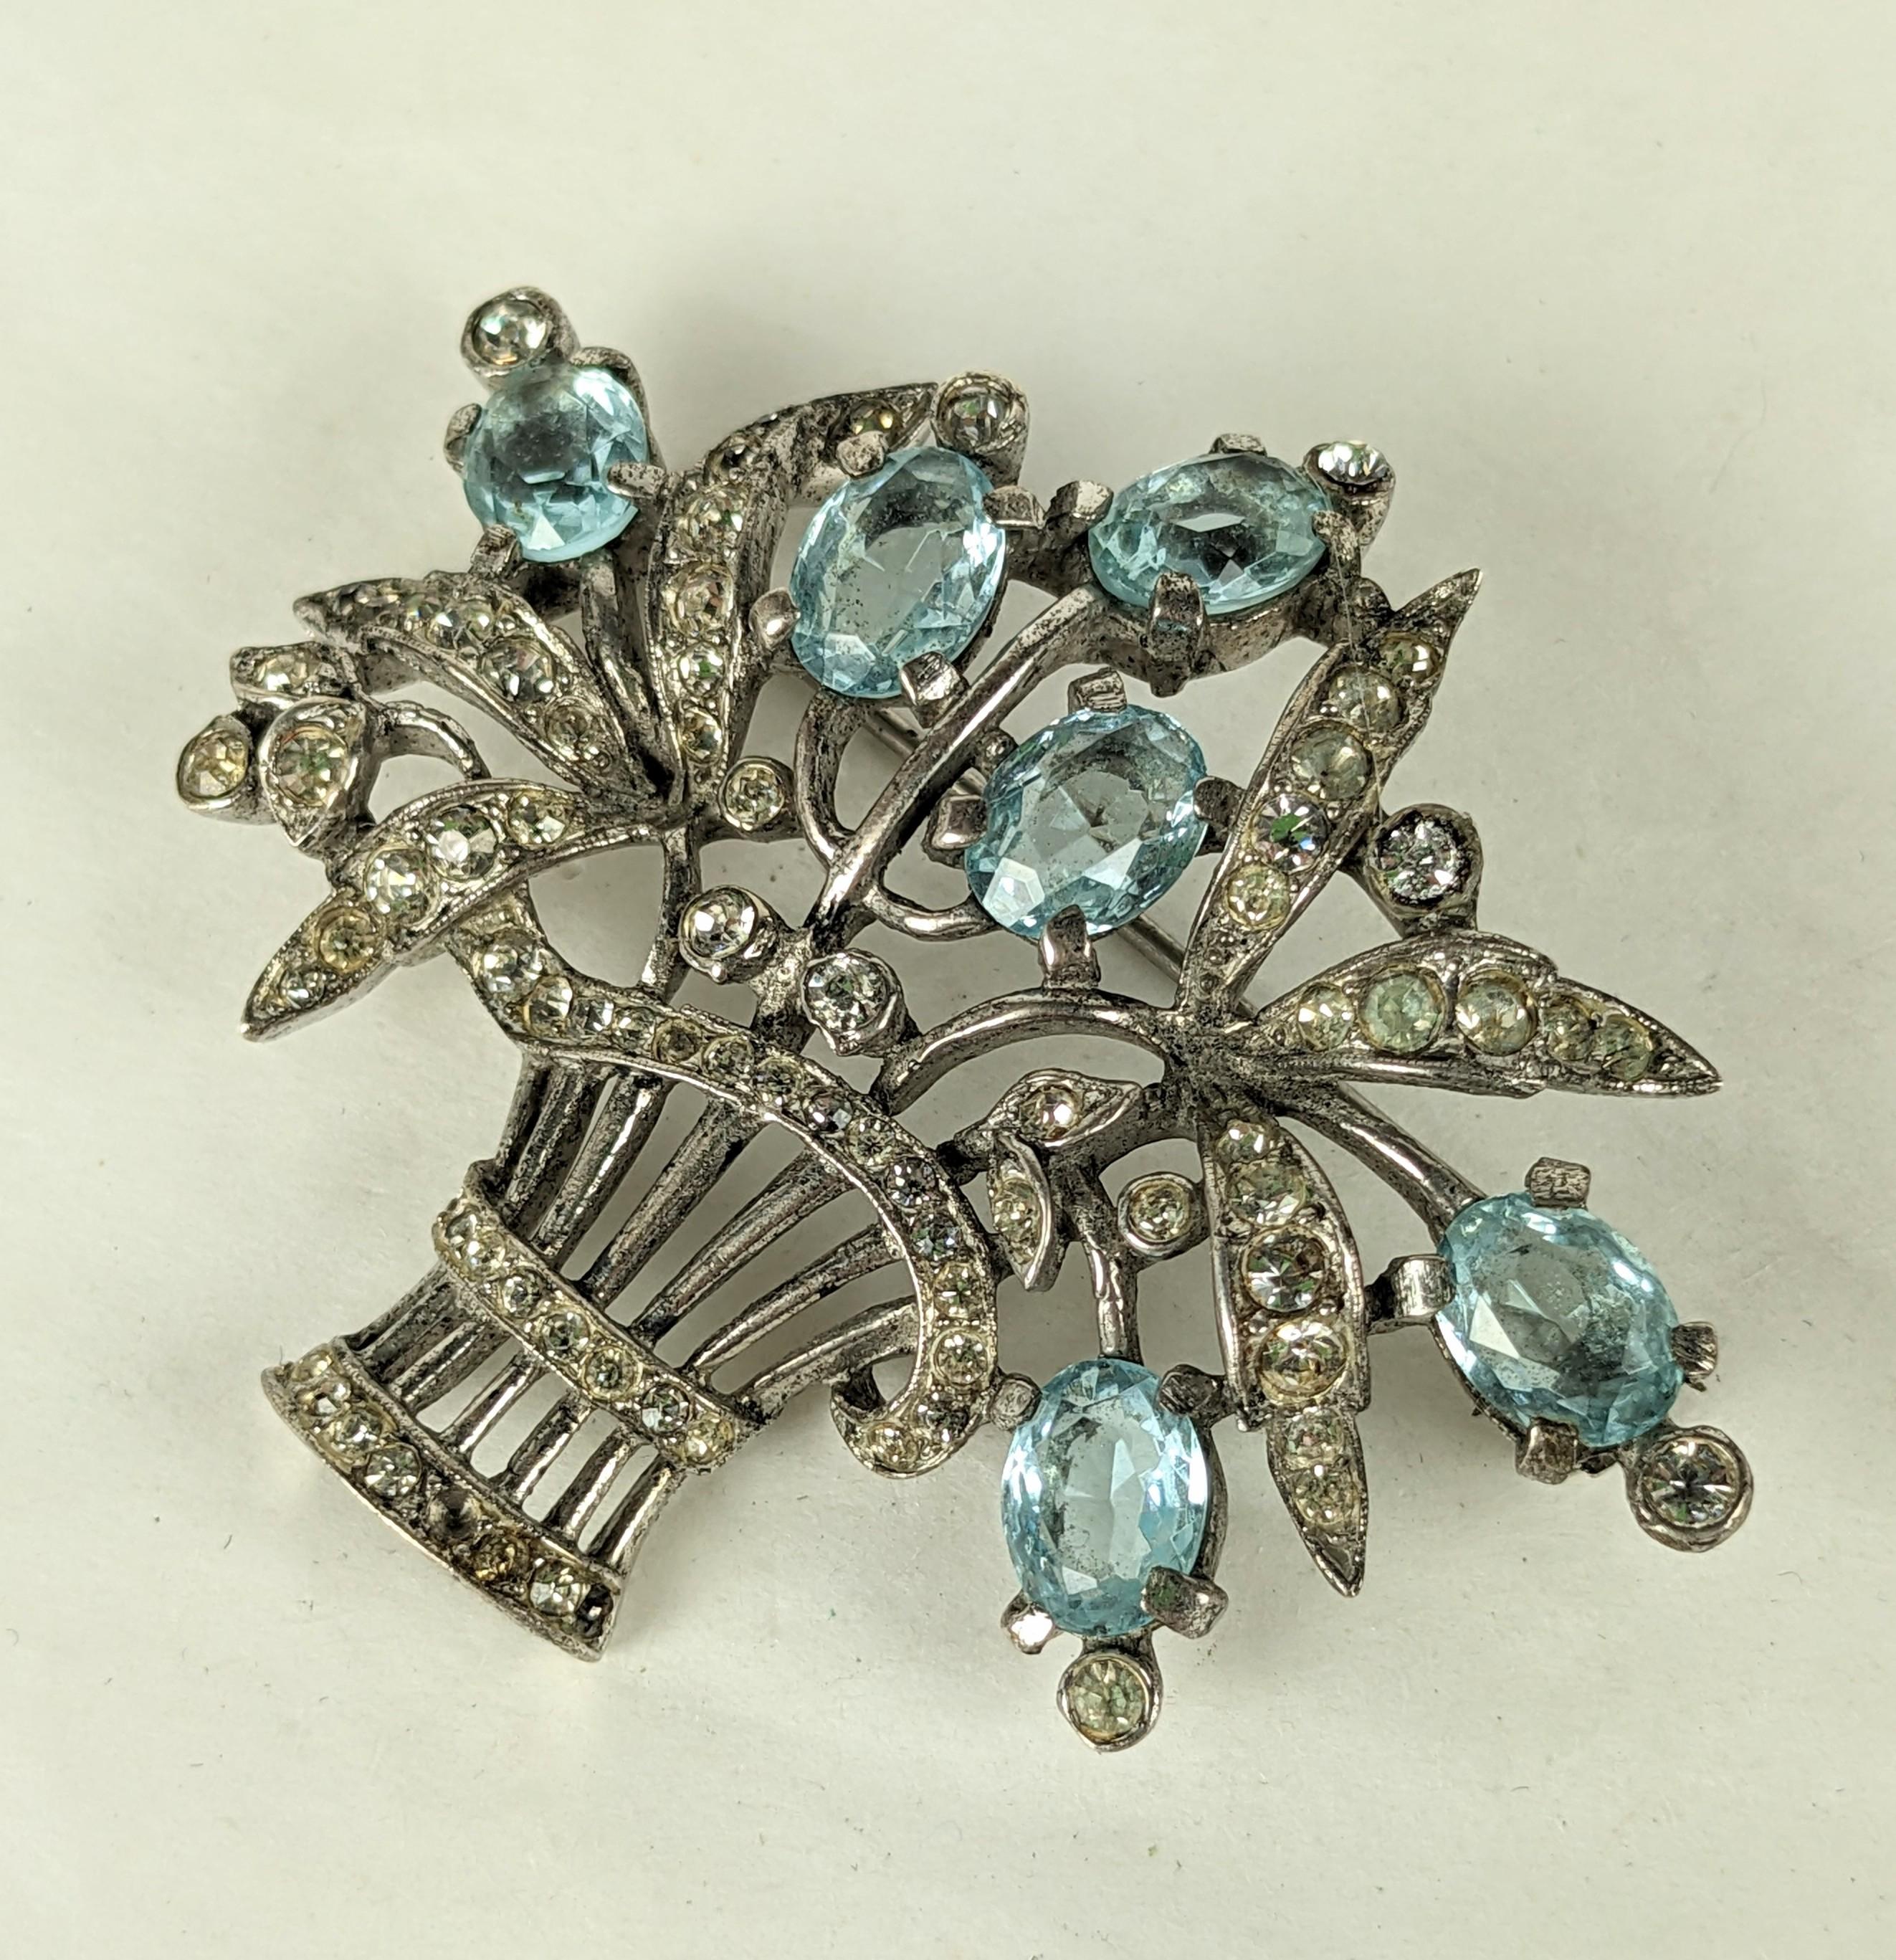 Elegant Trifari Sterling Aqua Giardinetto Brooch from the 1930's by Alfred Phillipe. Set in sterling with crystals and aqua pastes in a flower basket motif. 1930's USA. 2